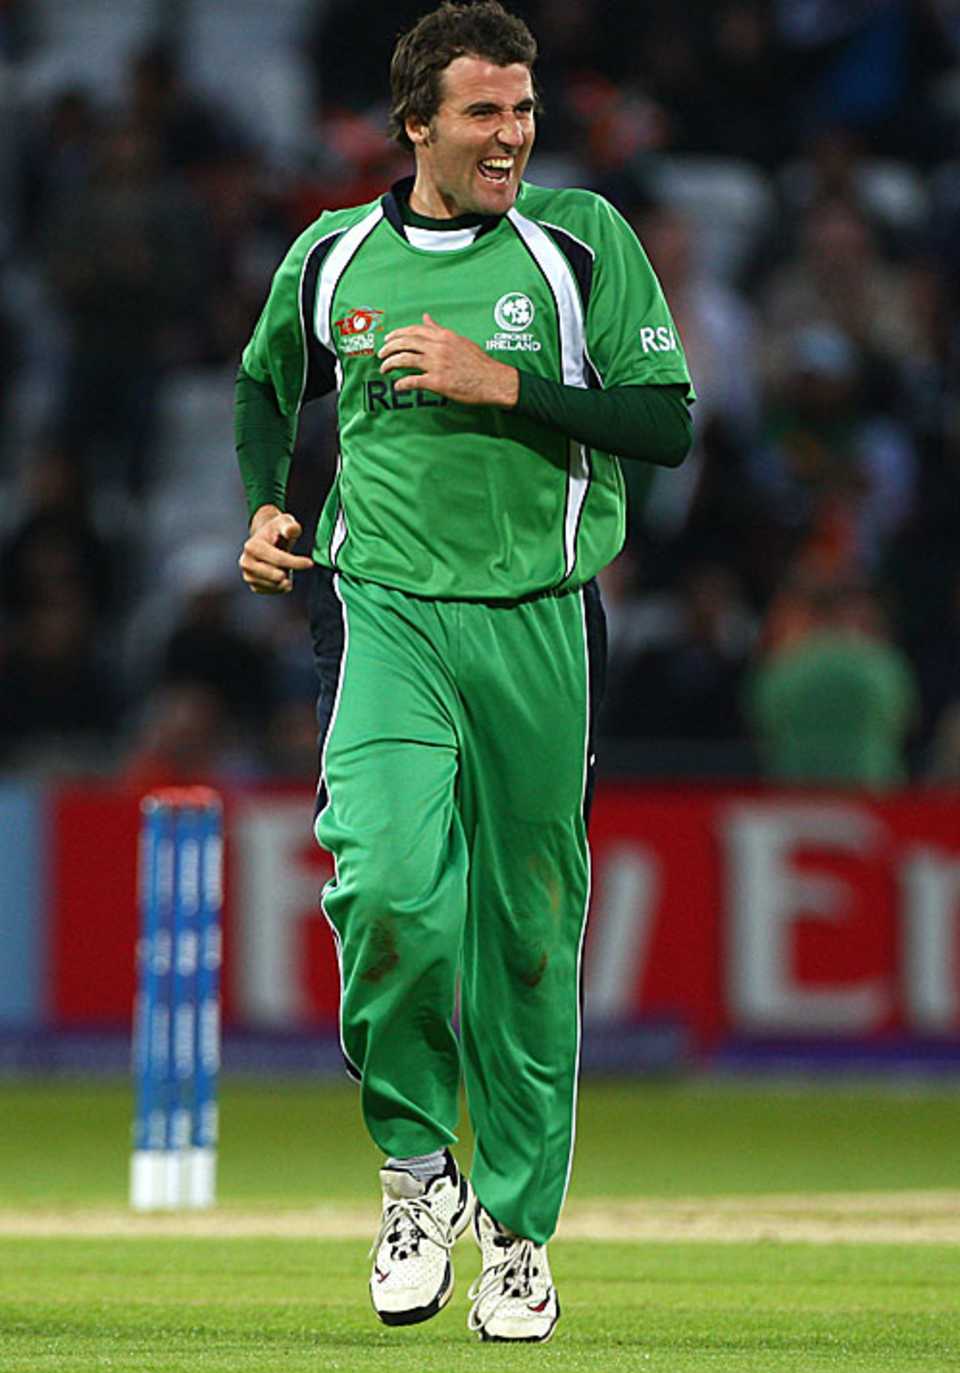 Kyle McCallan is chuffed after getting rid of MS Dhoni